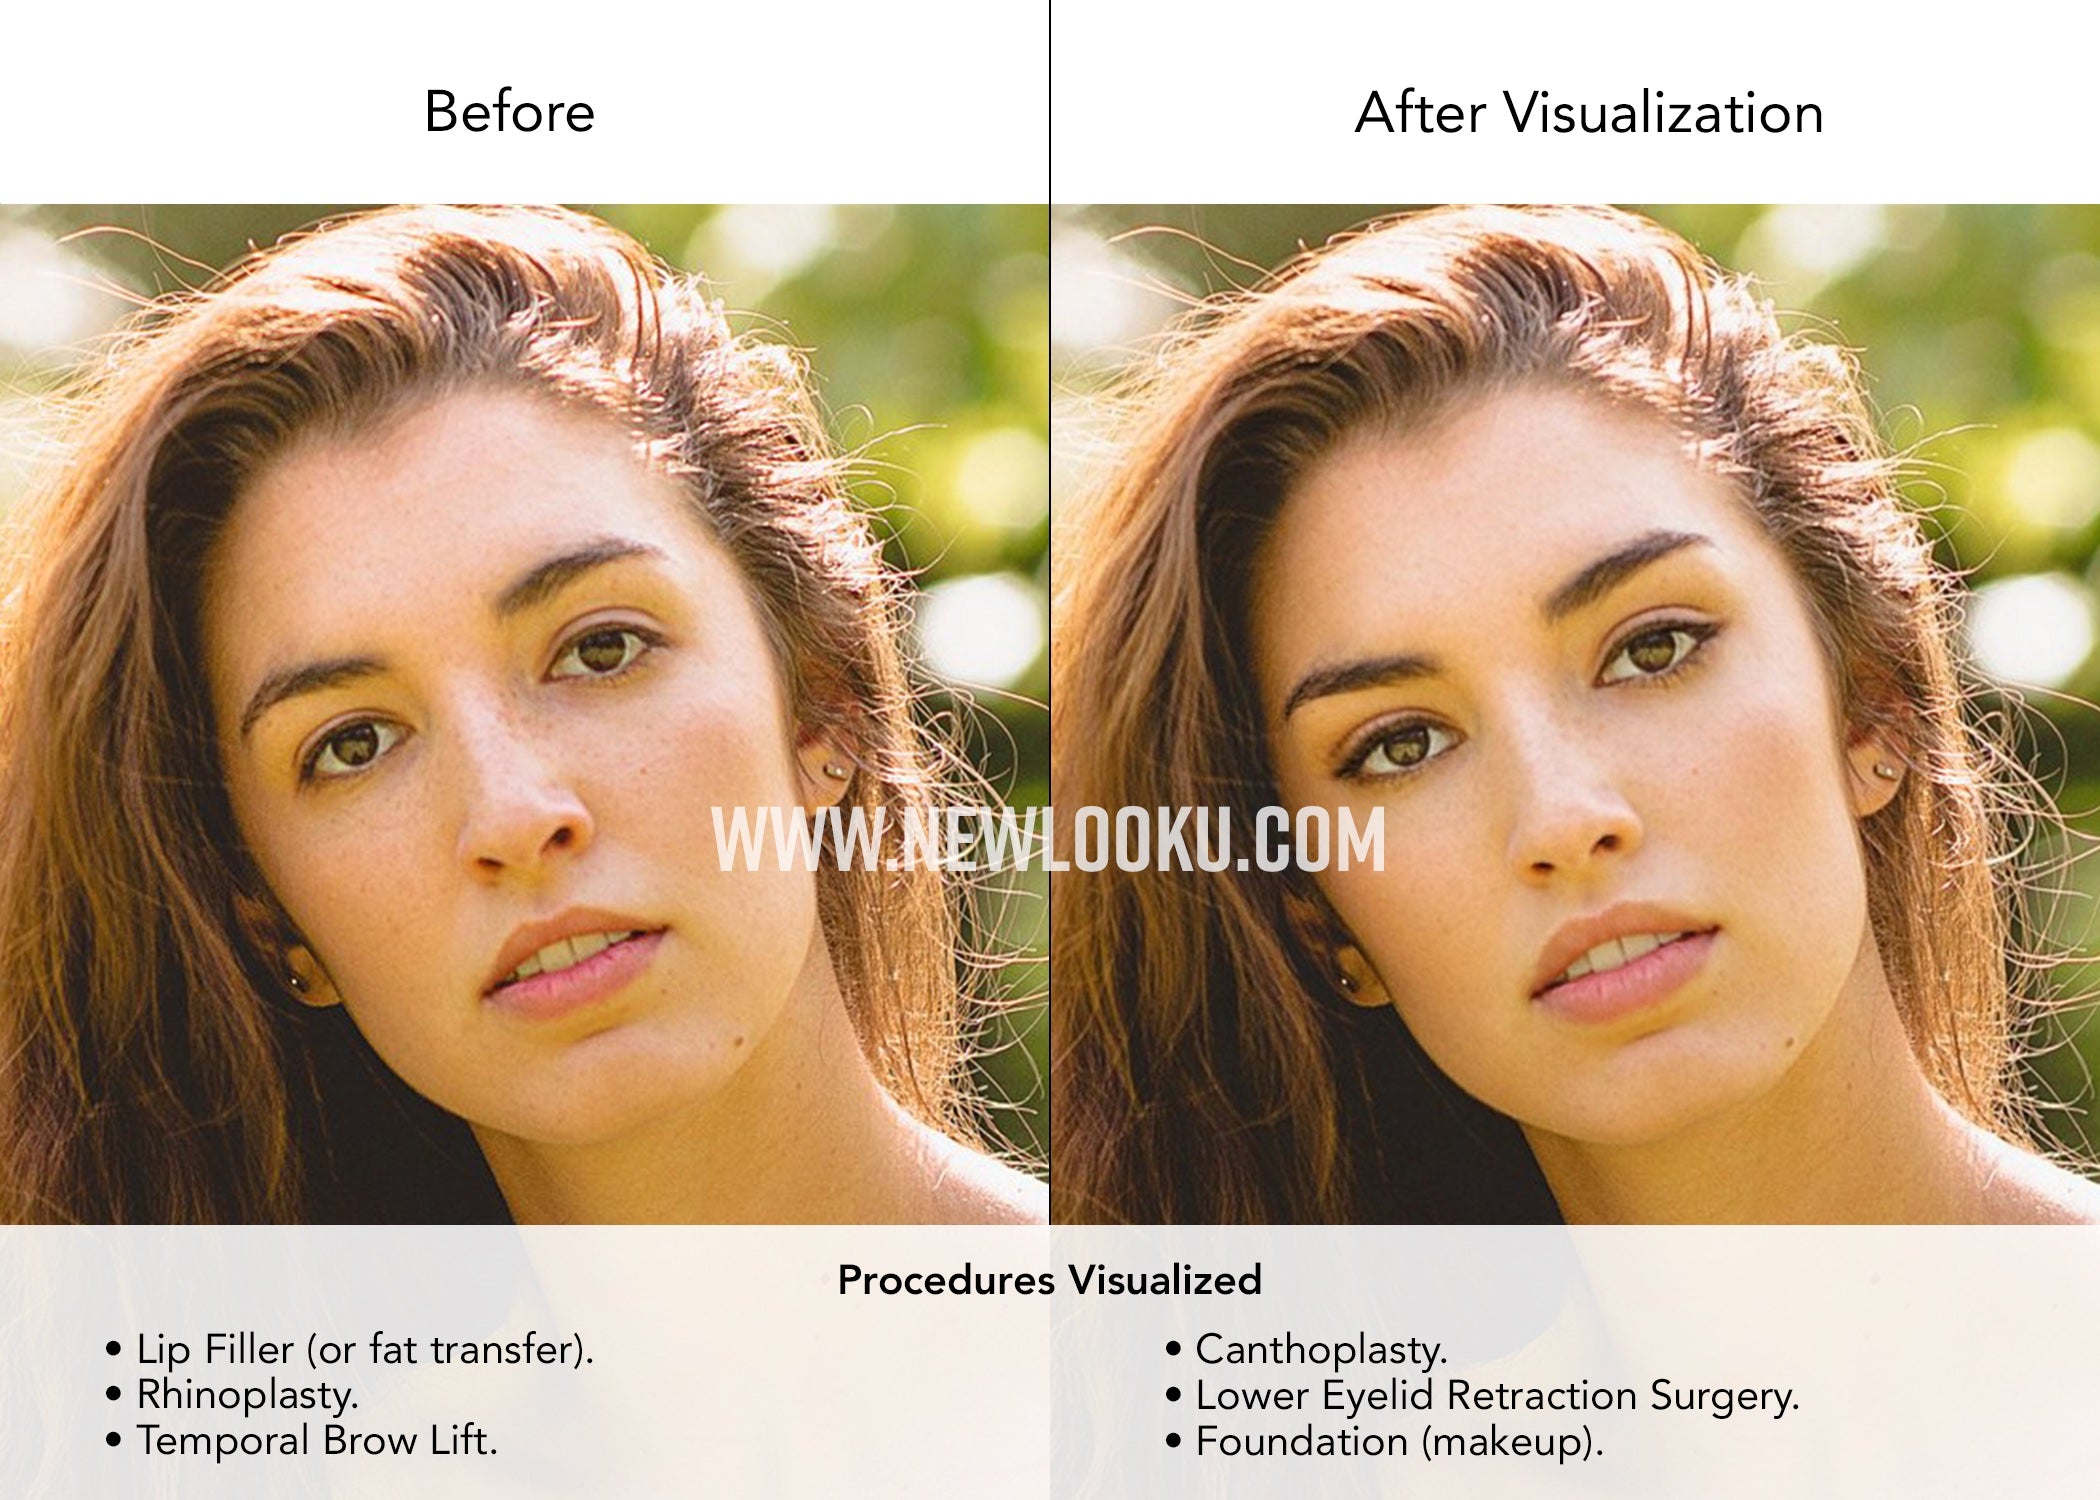 Female Plastic Surgery Visualization Before and After: Lip Filler (or fat transfer). Rhinoplasty. Temporal Brow Lift and Canthoplasty. Lower Eyelid Retraction Surgery. 